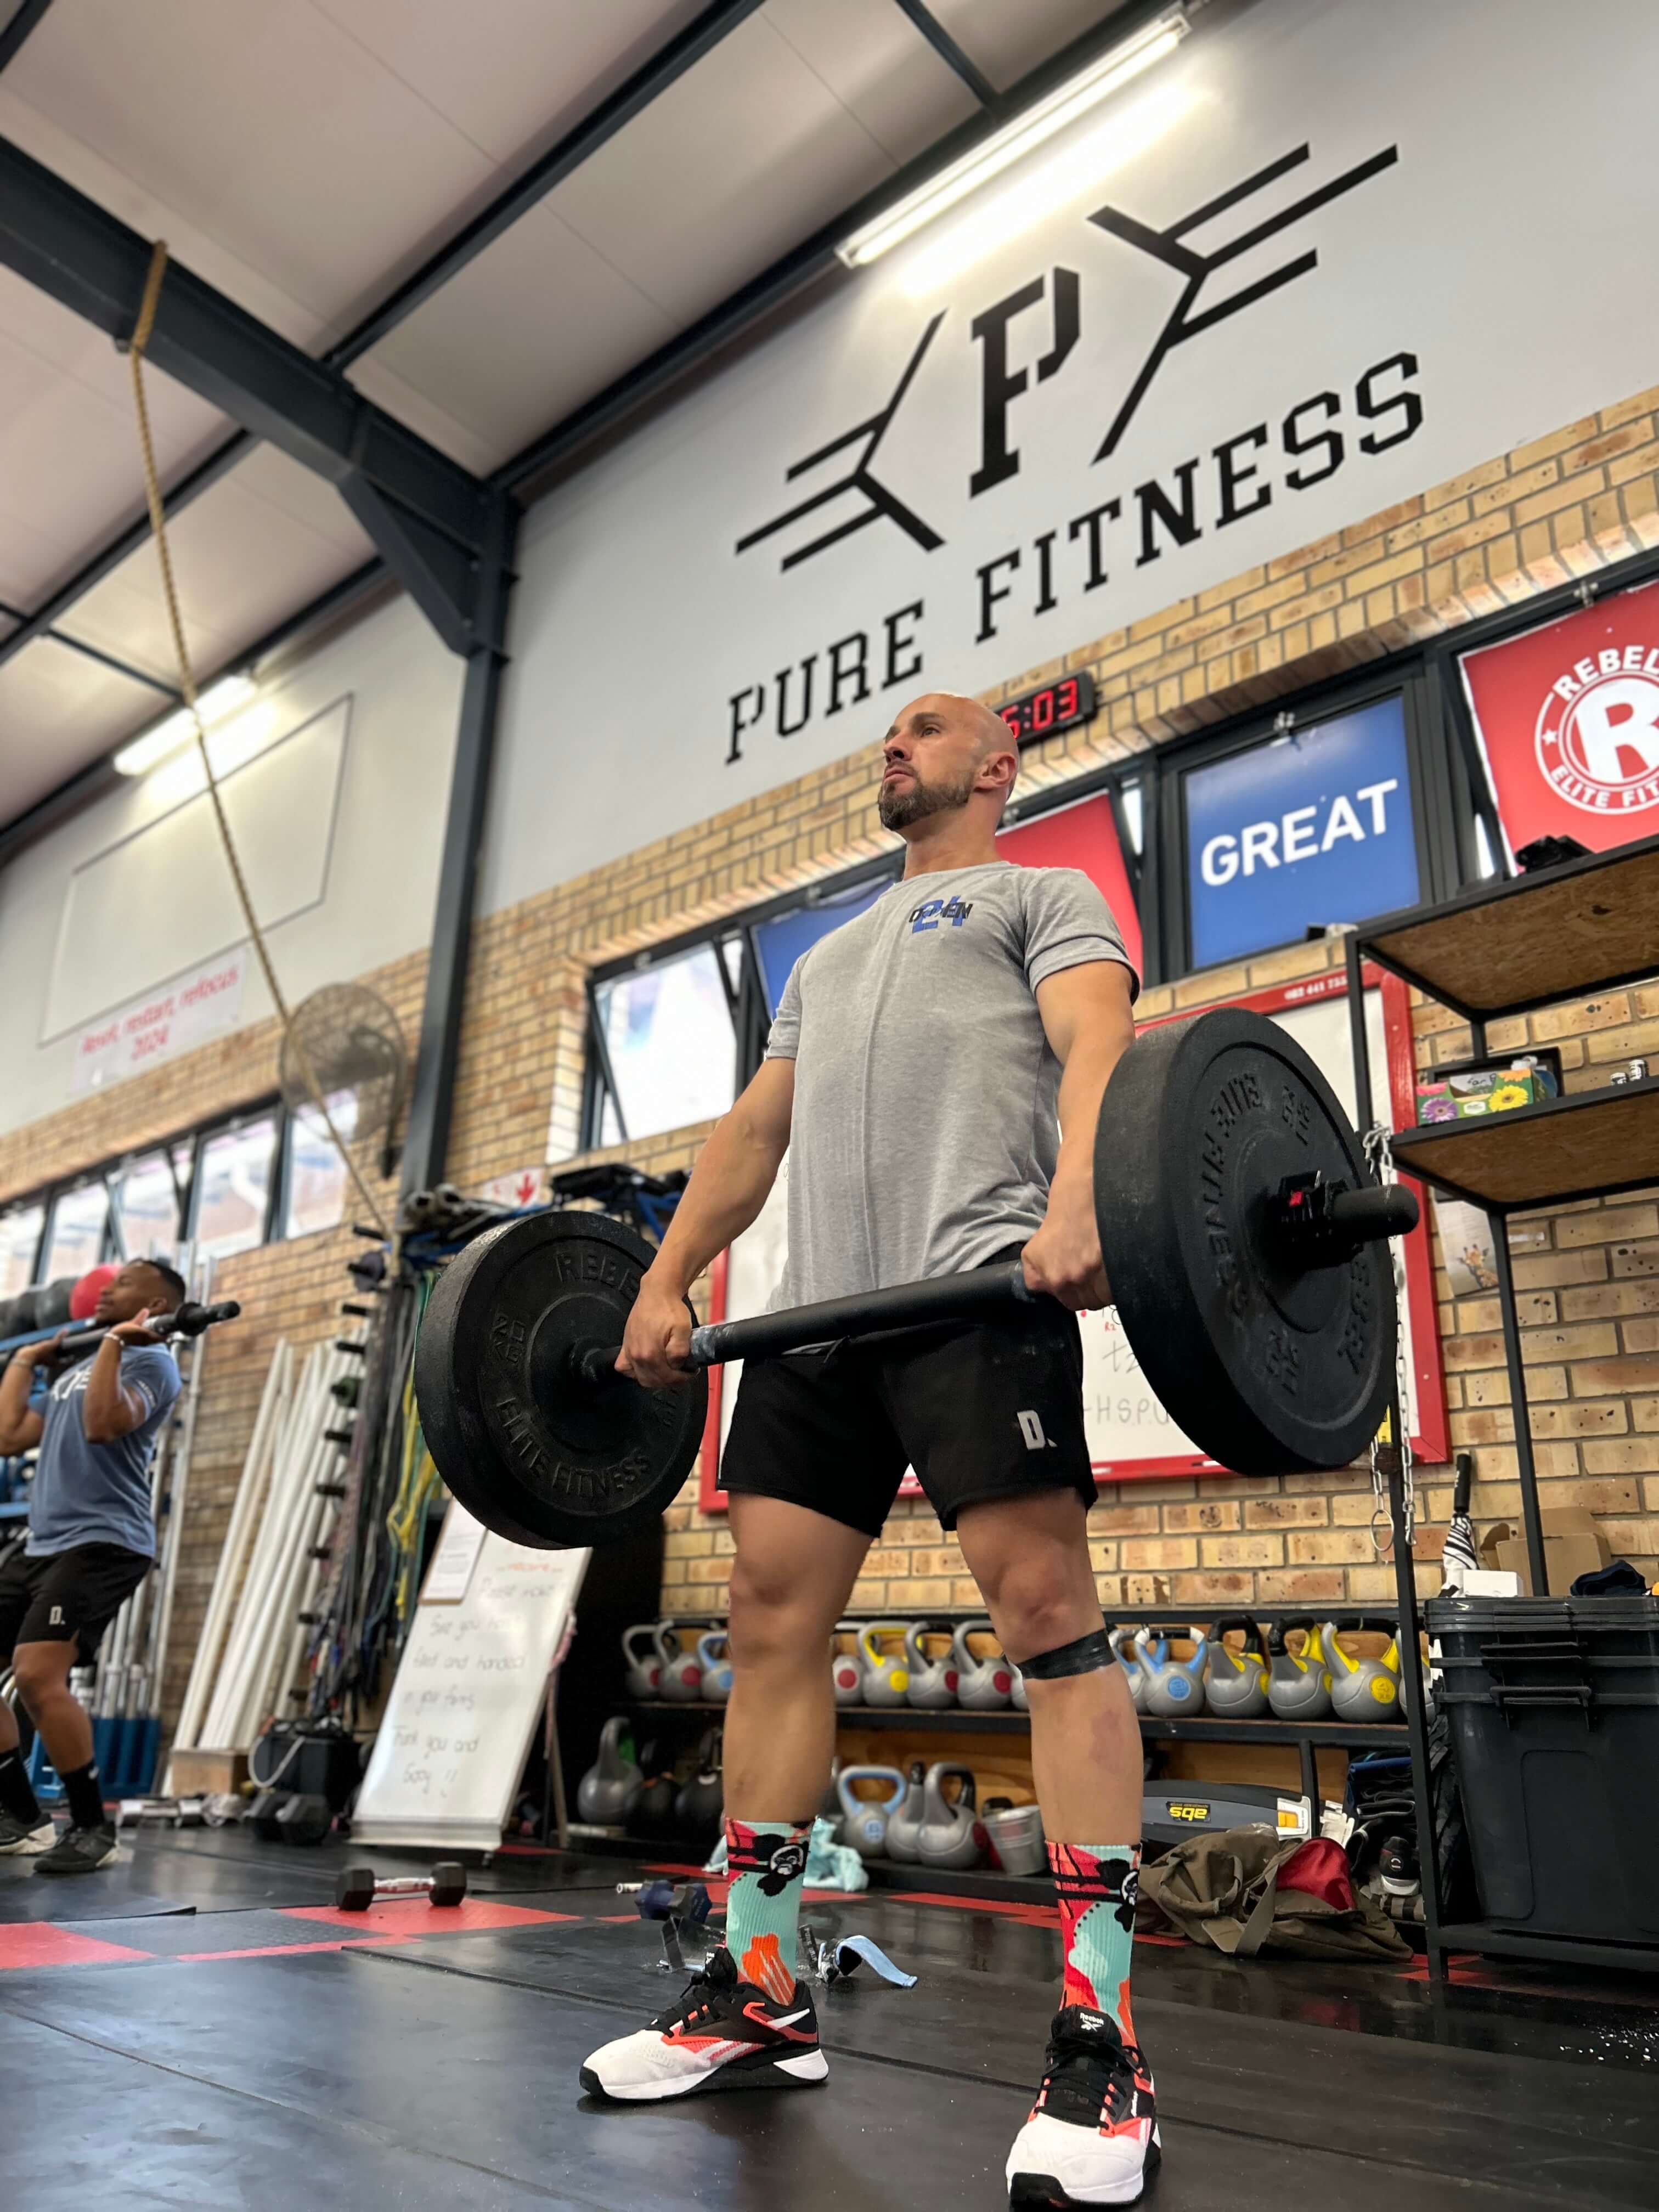 Lifting the Bar - How Steel Tube Services and Pure Fitness Crossfit Gym Created Gym History - 3